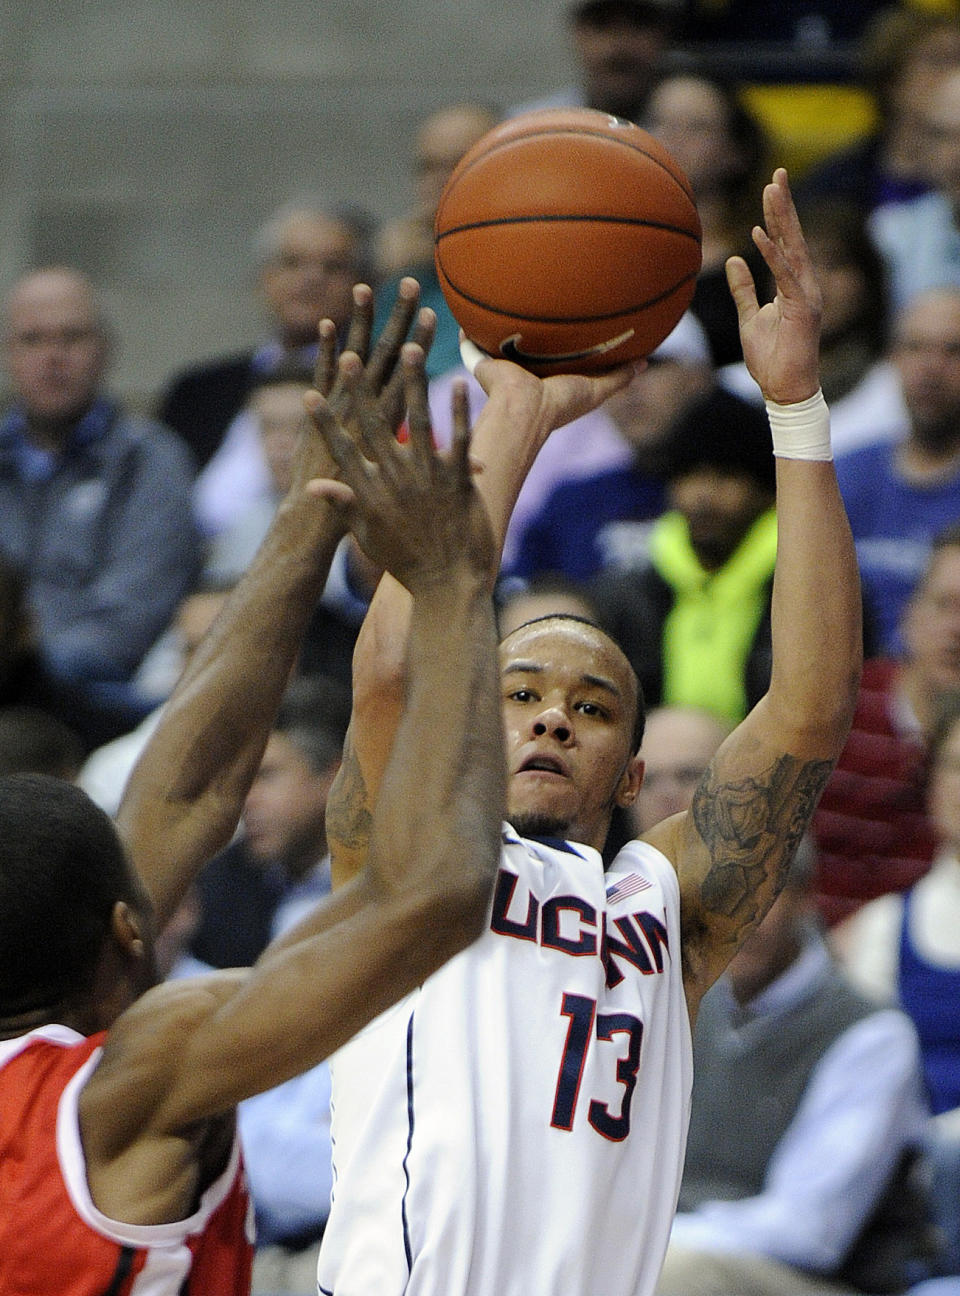 FILE - In this March 5, 2014 file photo, Connecticut's Shabazz Napier (13) shoots over Rutgers' Malick Kone during the first half of an NCAA college basketball game in Storrs, Conn. Napier was selected to The Associated Press All-America team, released Monday, March 31, 2014. (AP Photo/Fred Beckham, File)